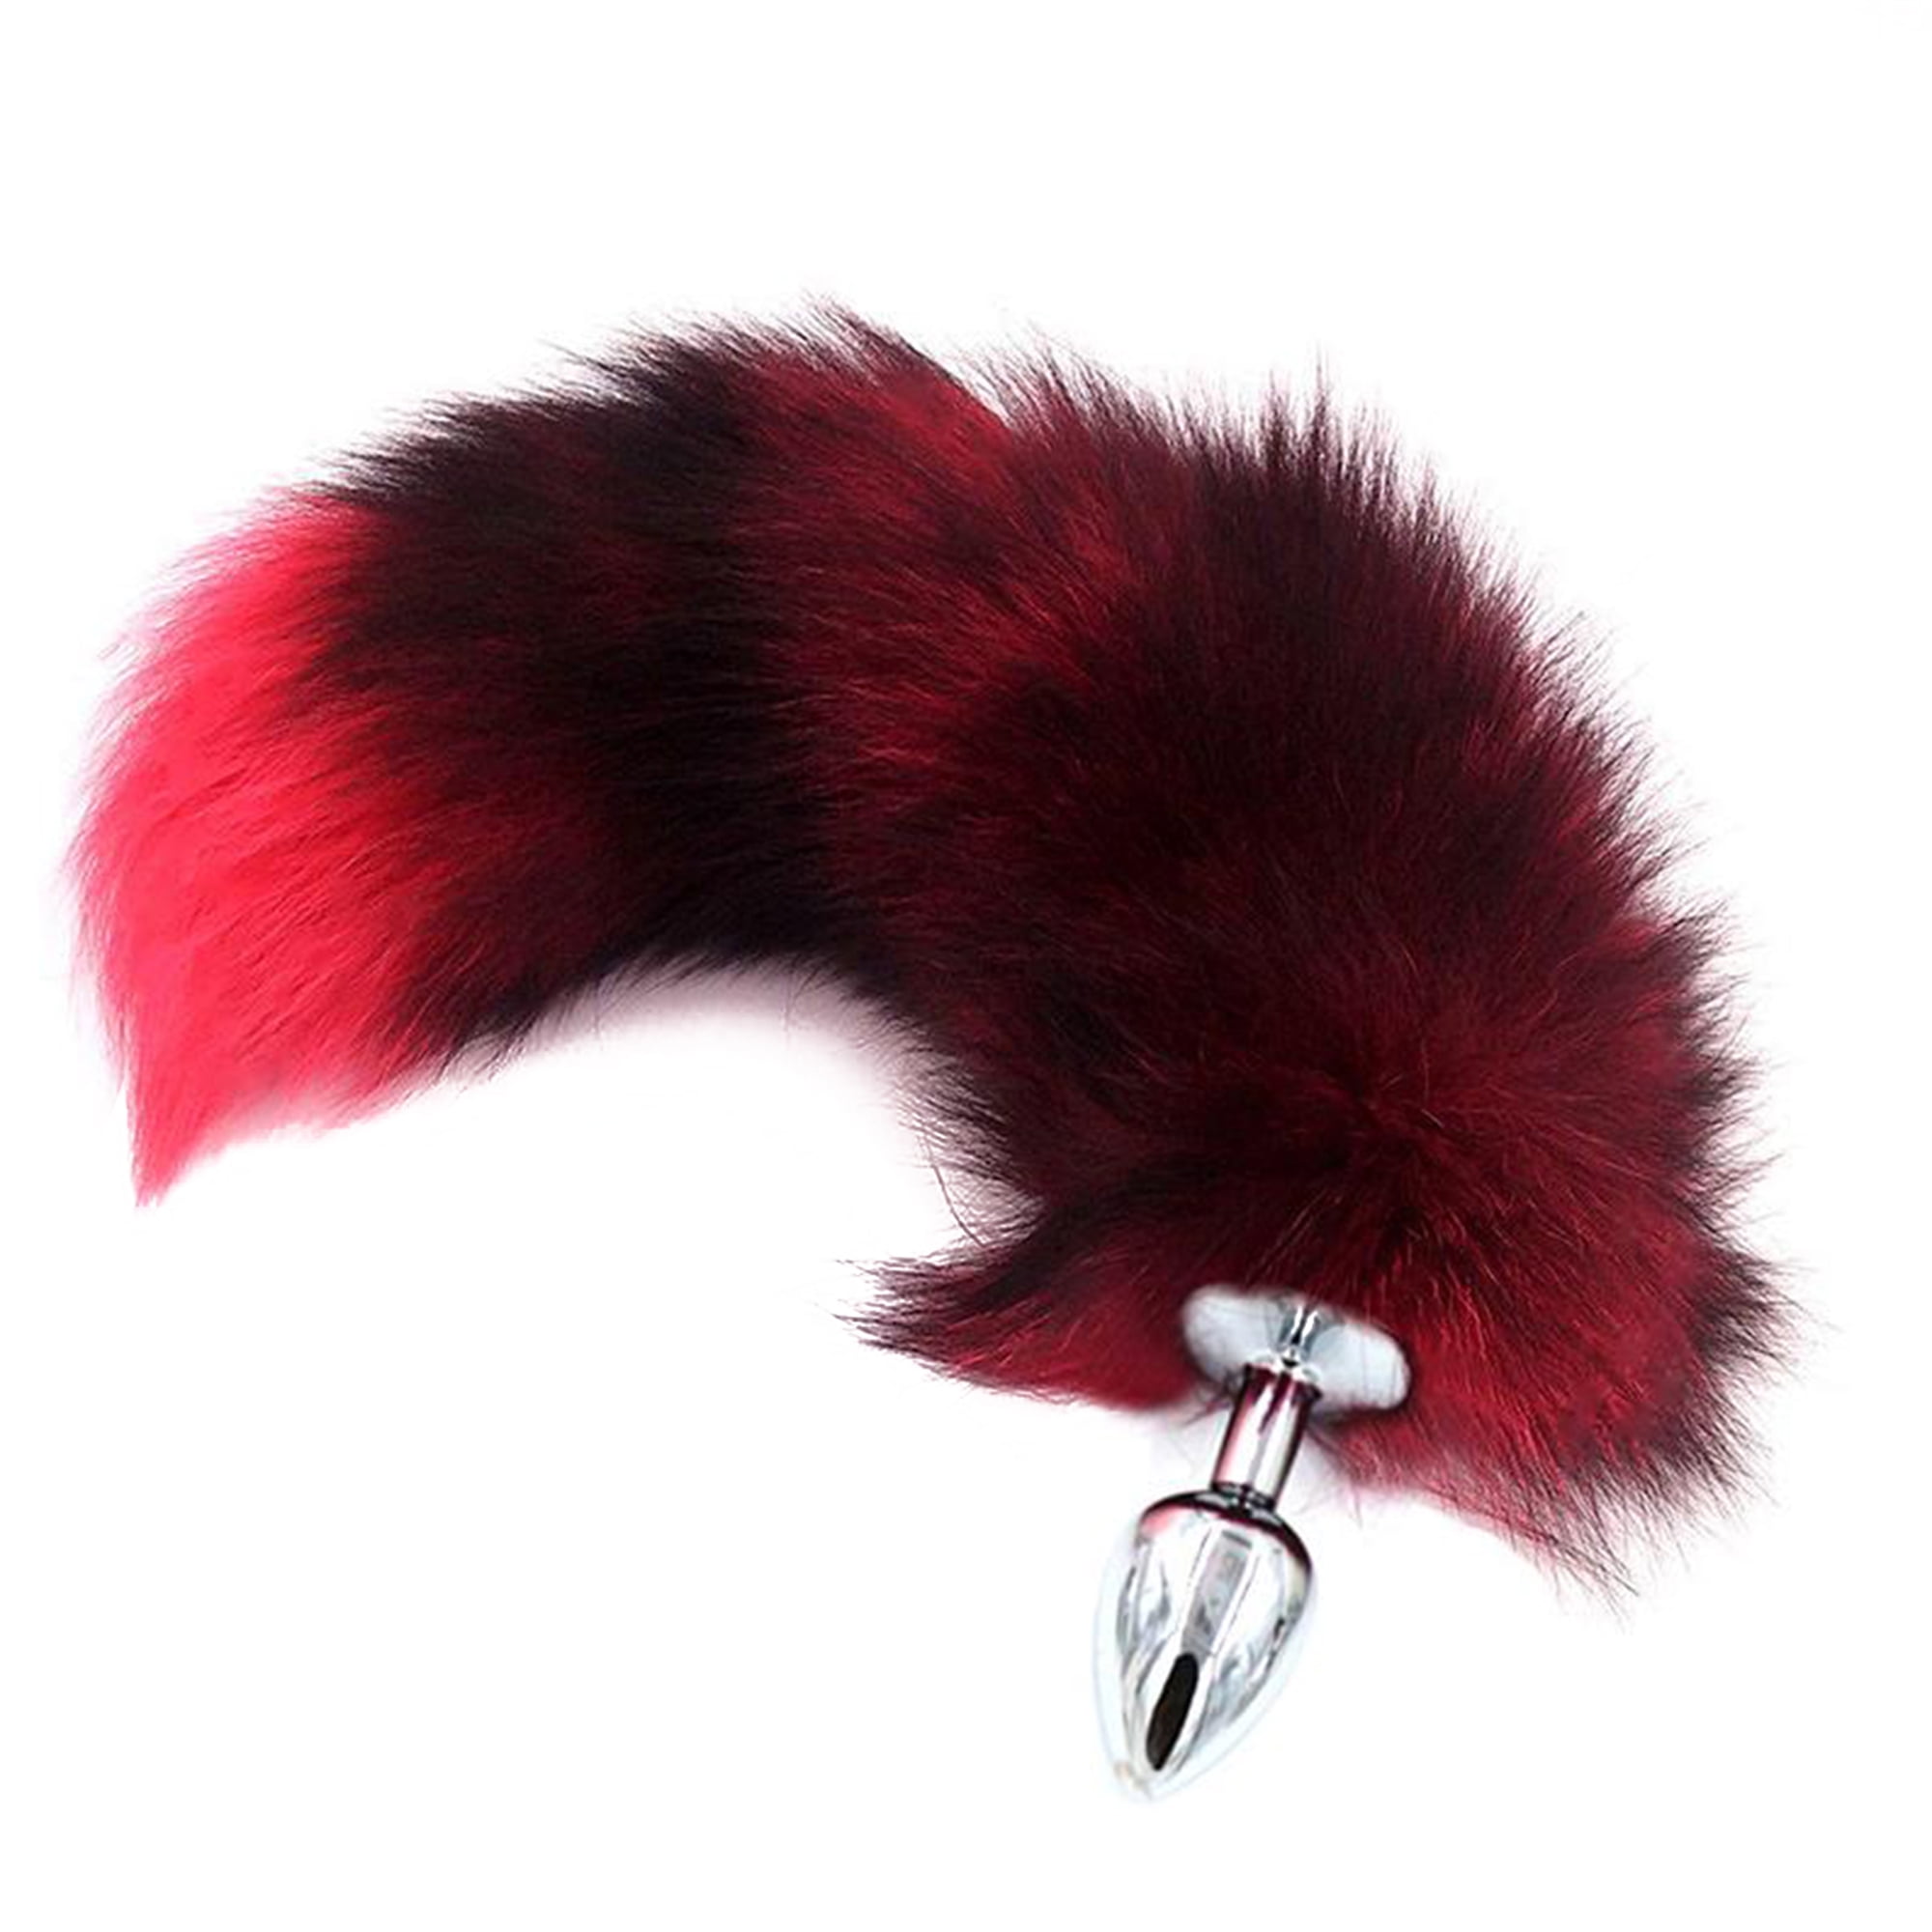 Fluffy White Fur Fox Tail Plug Cosplay Animal PET Tails Silicone Head Roleplay 